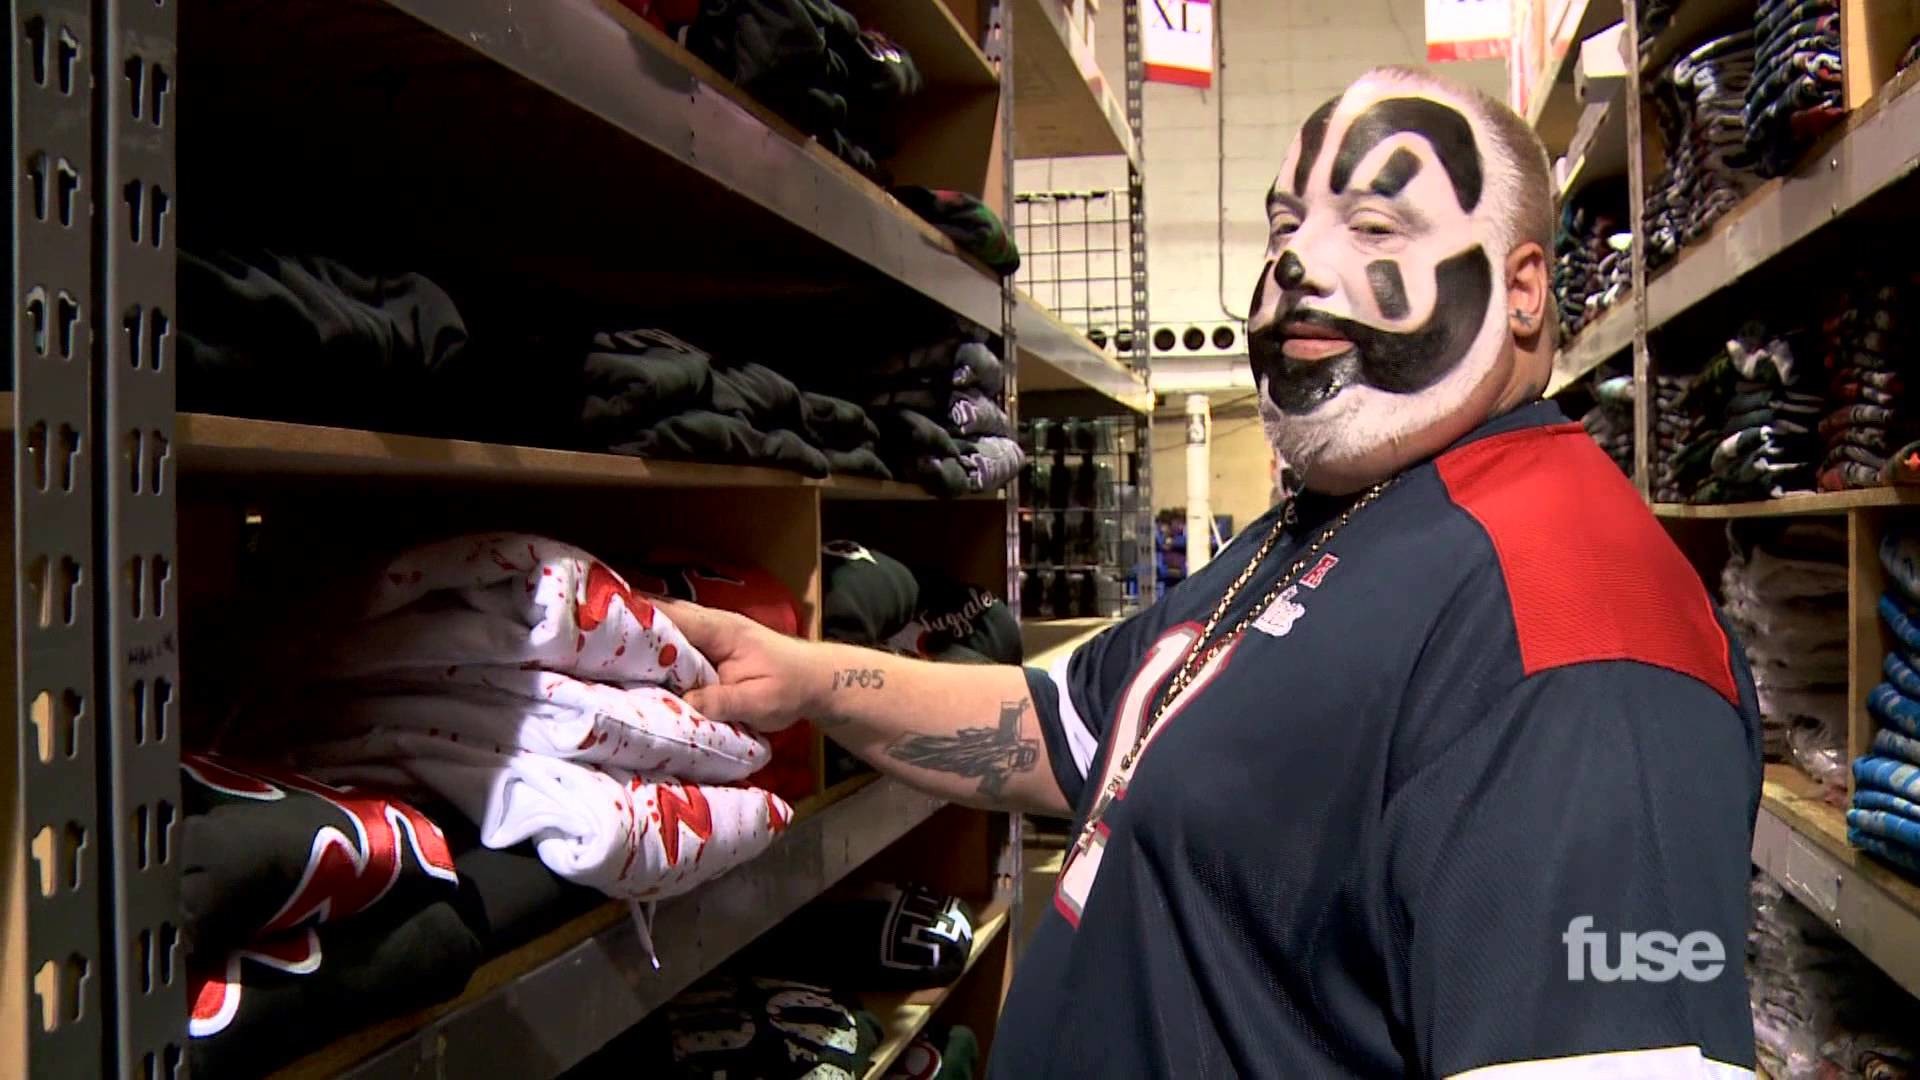 1920x1080 Get A Tour of Psychopathic Records from the Insane Clown Posse! |  Faygoluvers